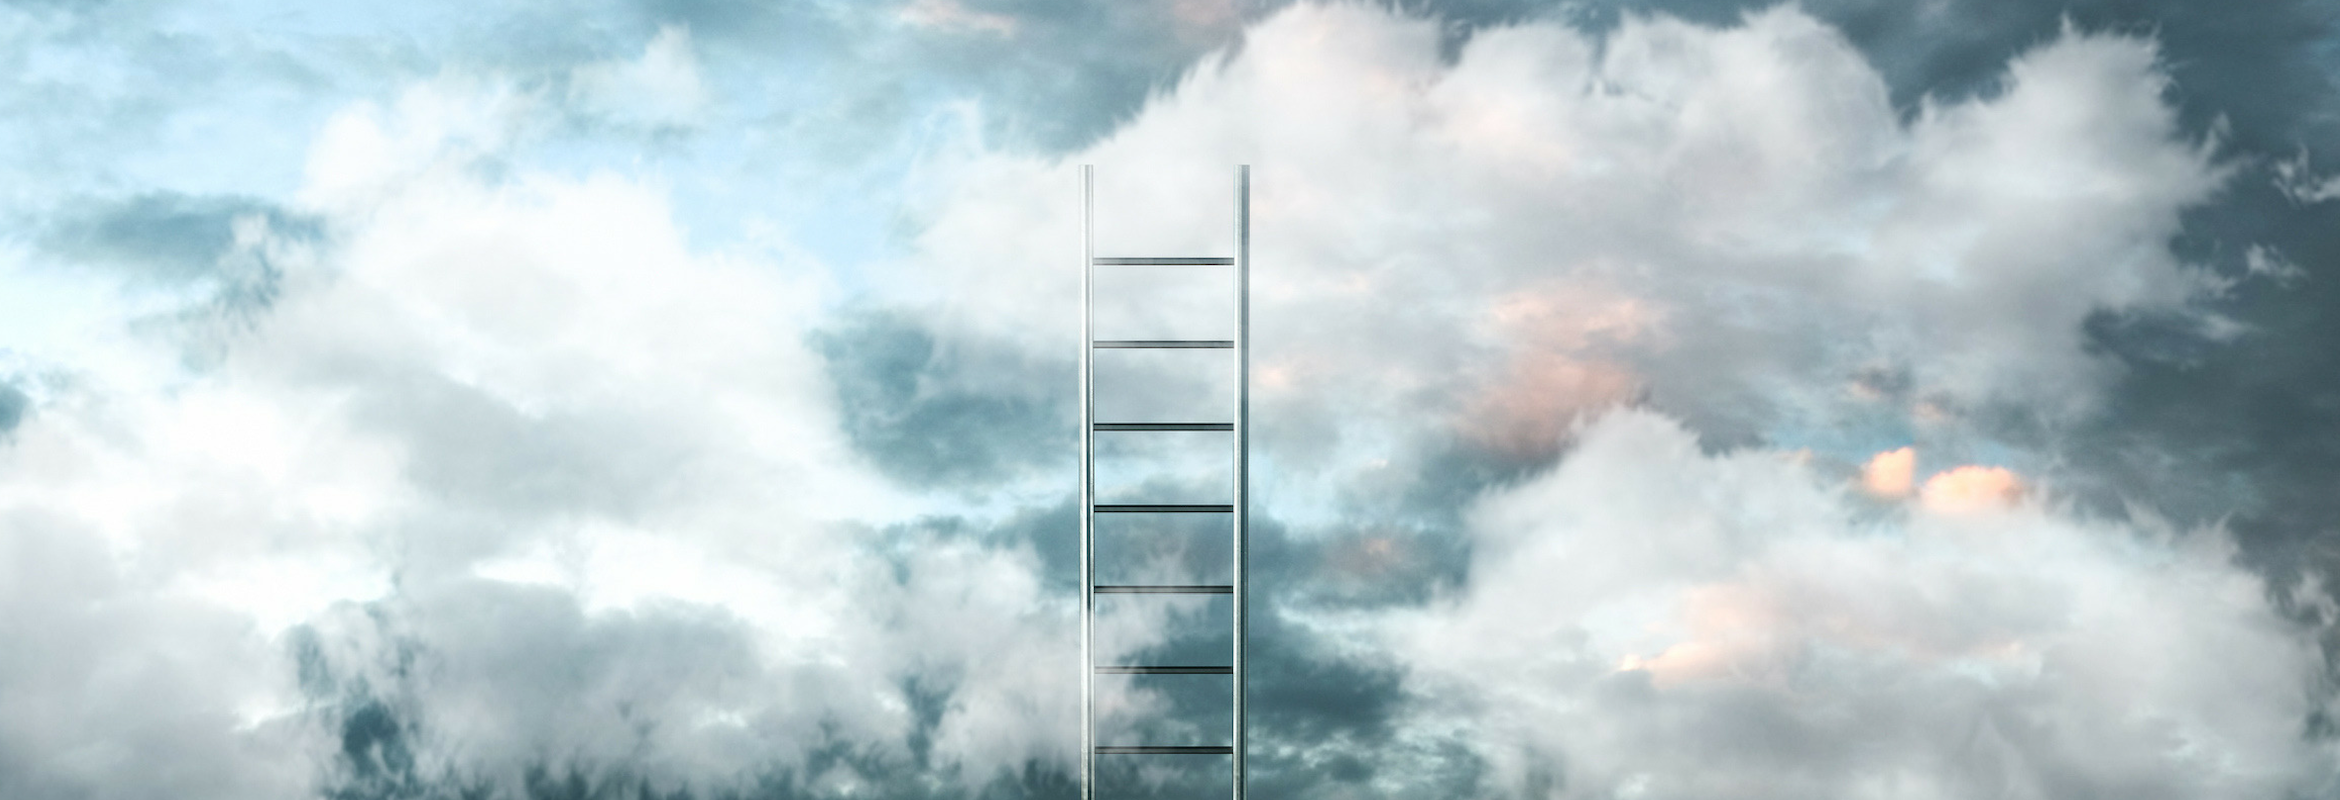 An image of a ladder in the clouds.